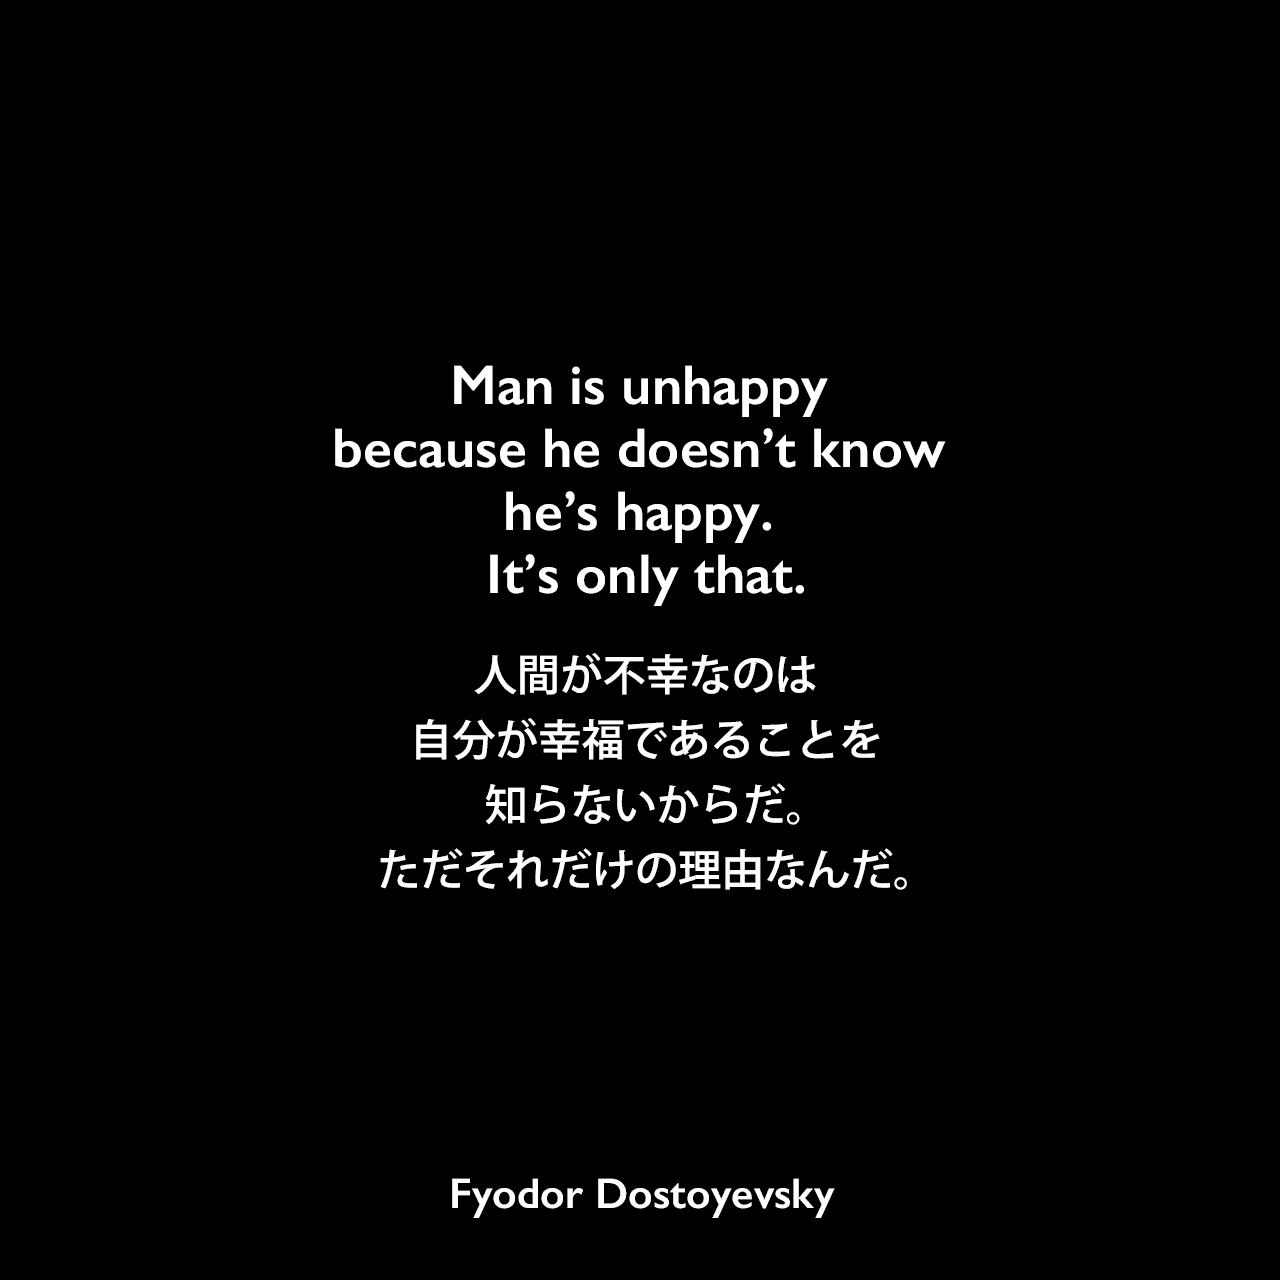 Man is unhappy because he doesn’t know he’s happy. It’s only that.人間が不幸なのは、自分が幸福であることを知らないからだ。ただそれだけの理由なんだ。- ドストエフキーの小説「悪霊」よりFyodor Dostoyevsky